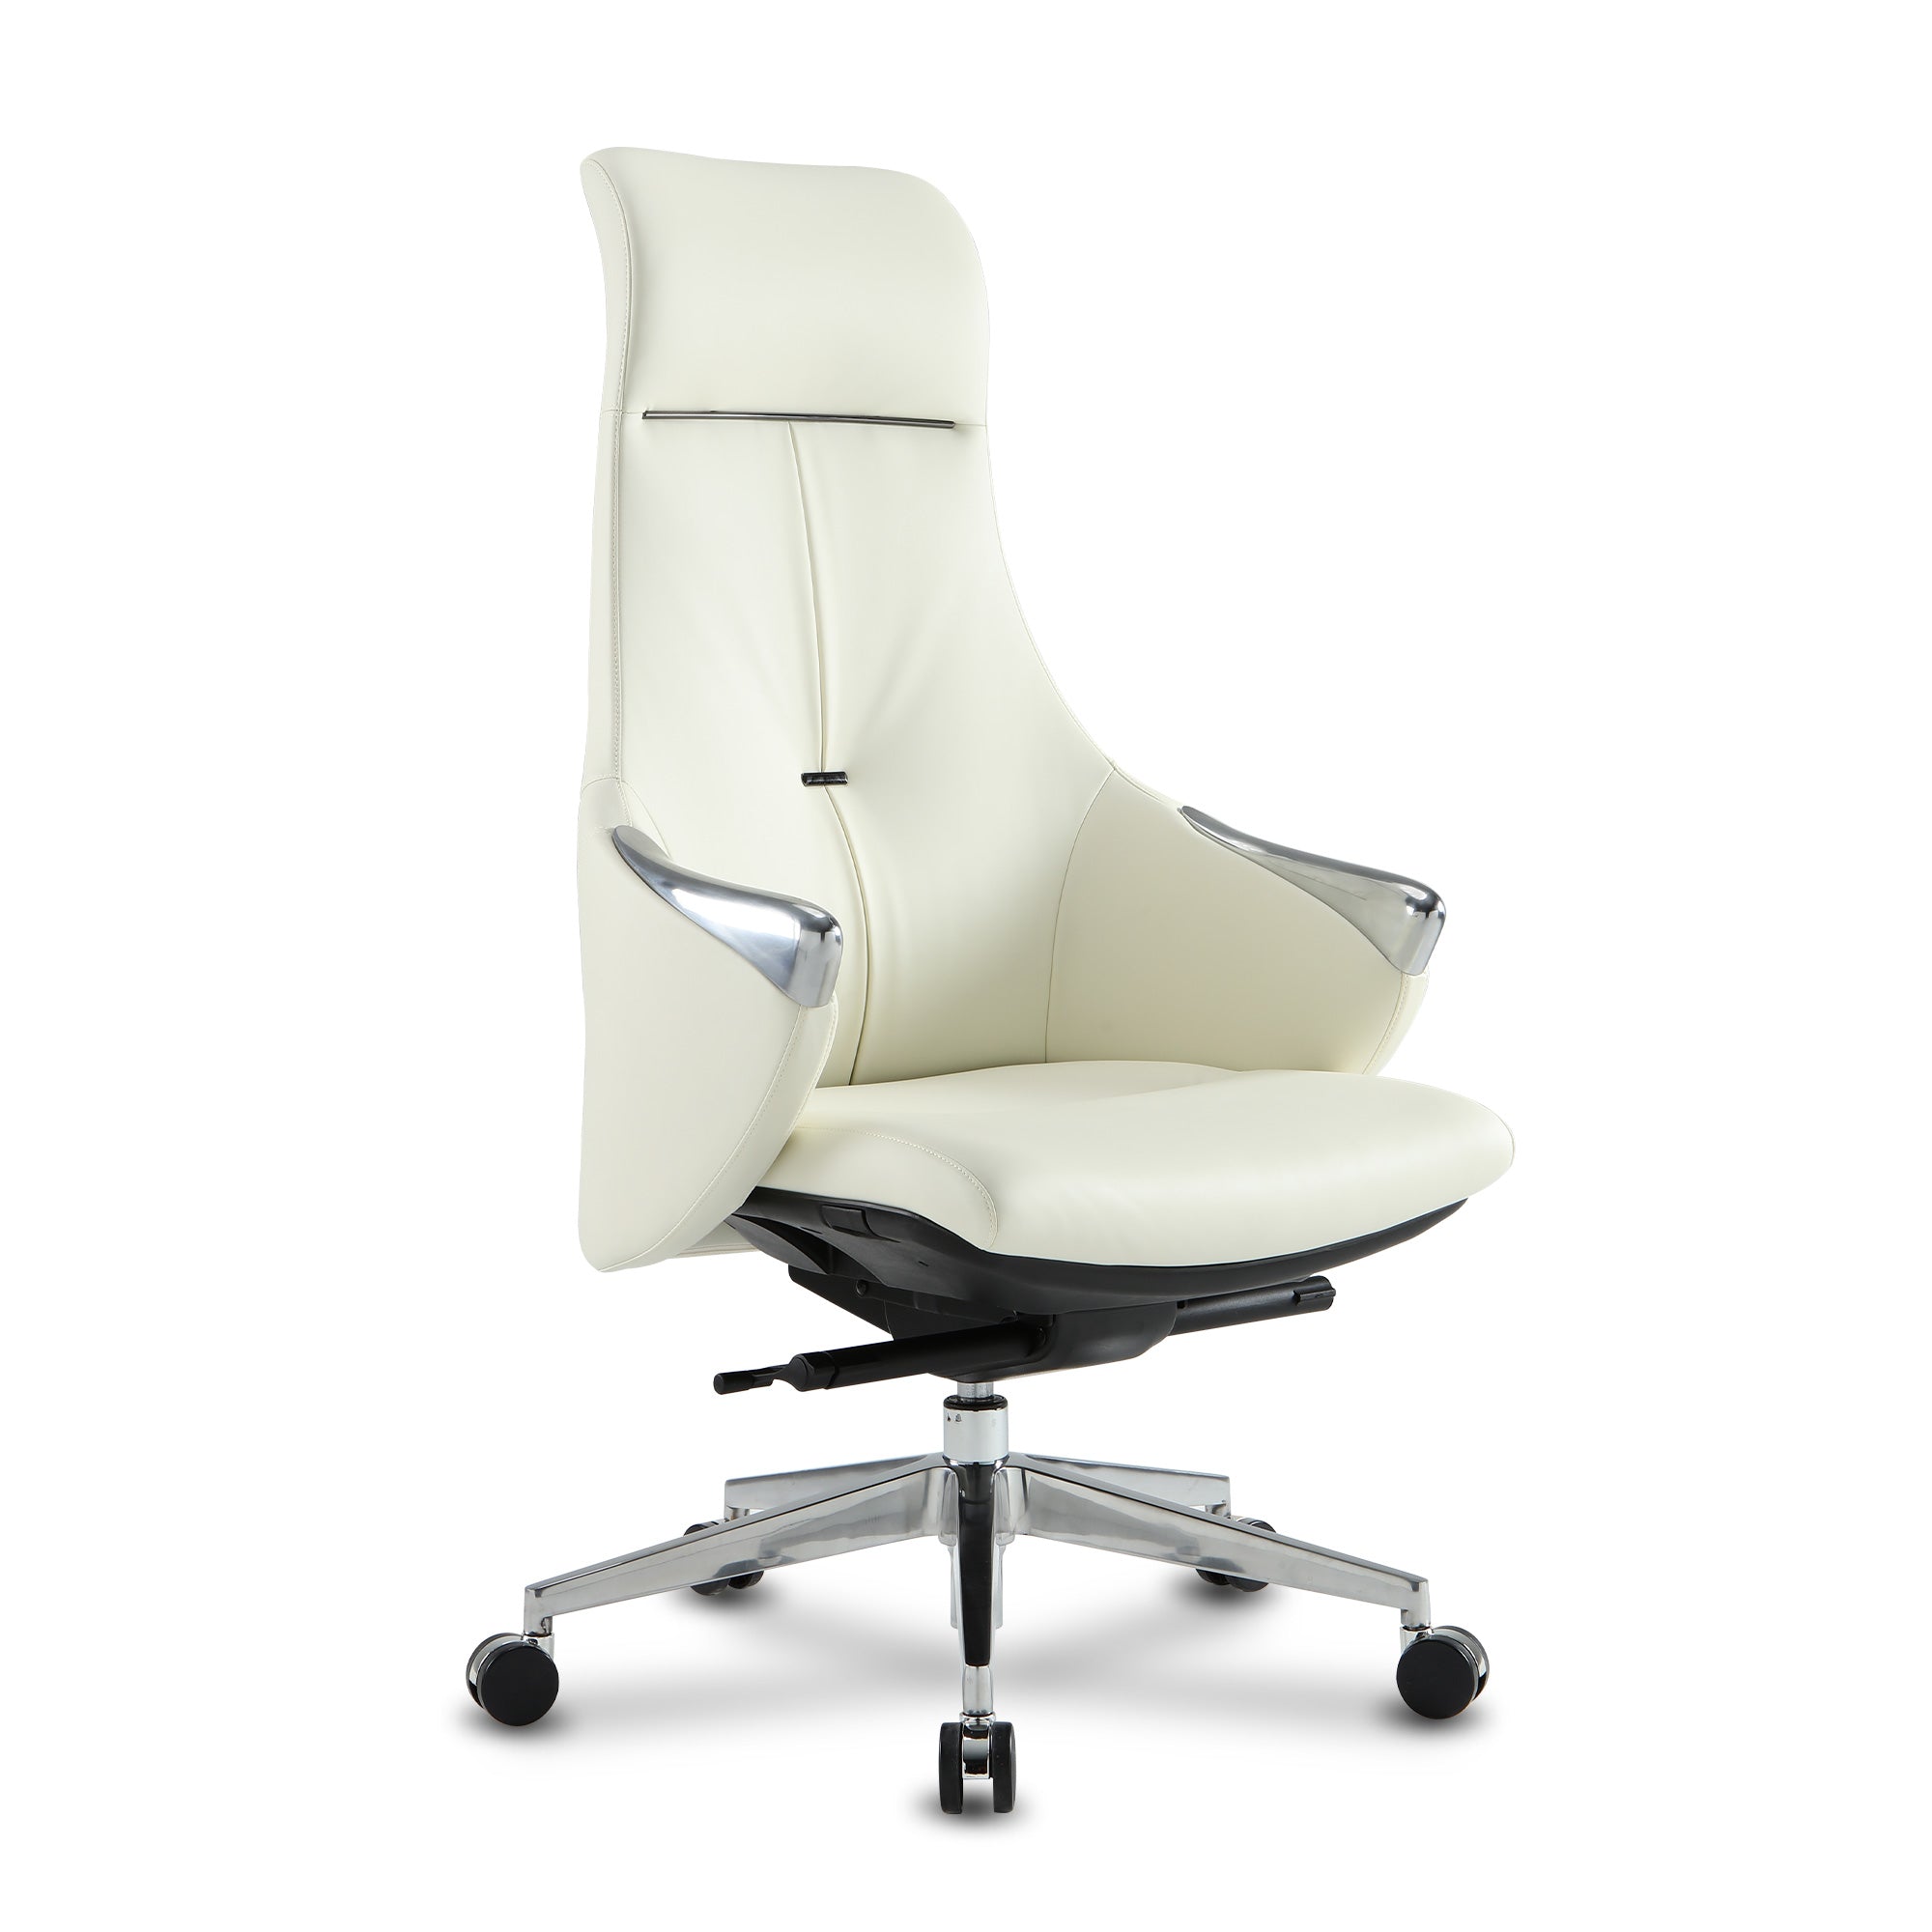 High Back Executive Chair, Ergonomic Leather Office Chair with Adjustable Height and Tilt Function and 360° Swivel Office Chair,White